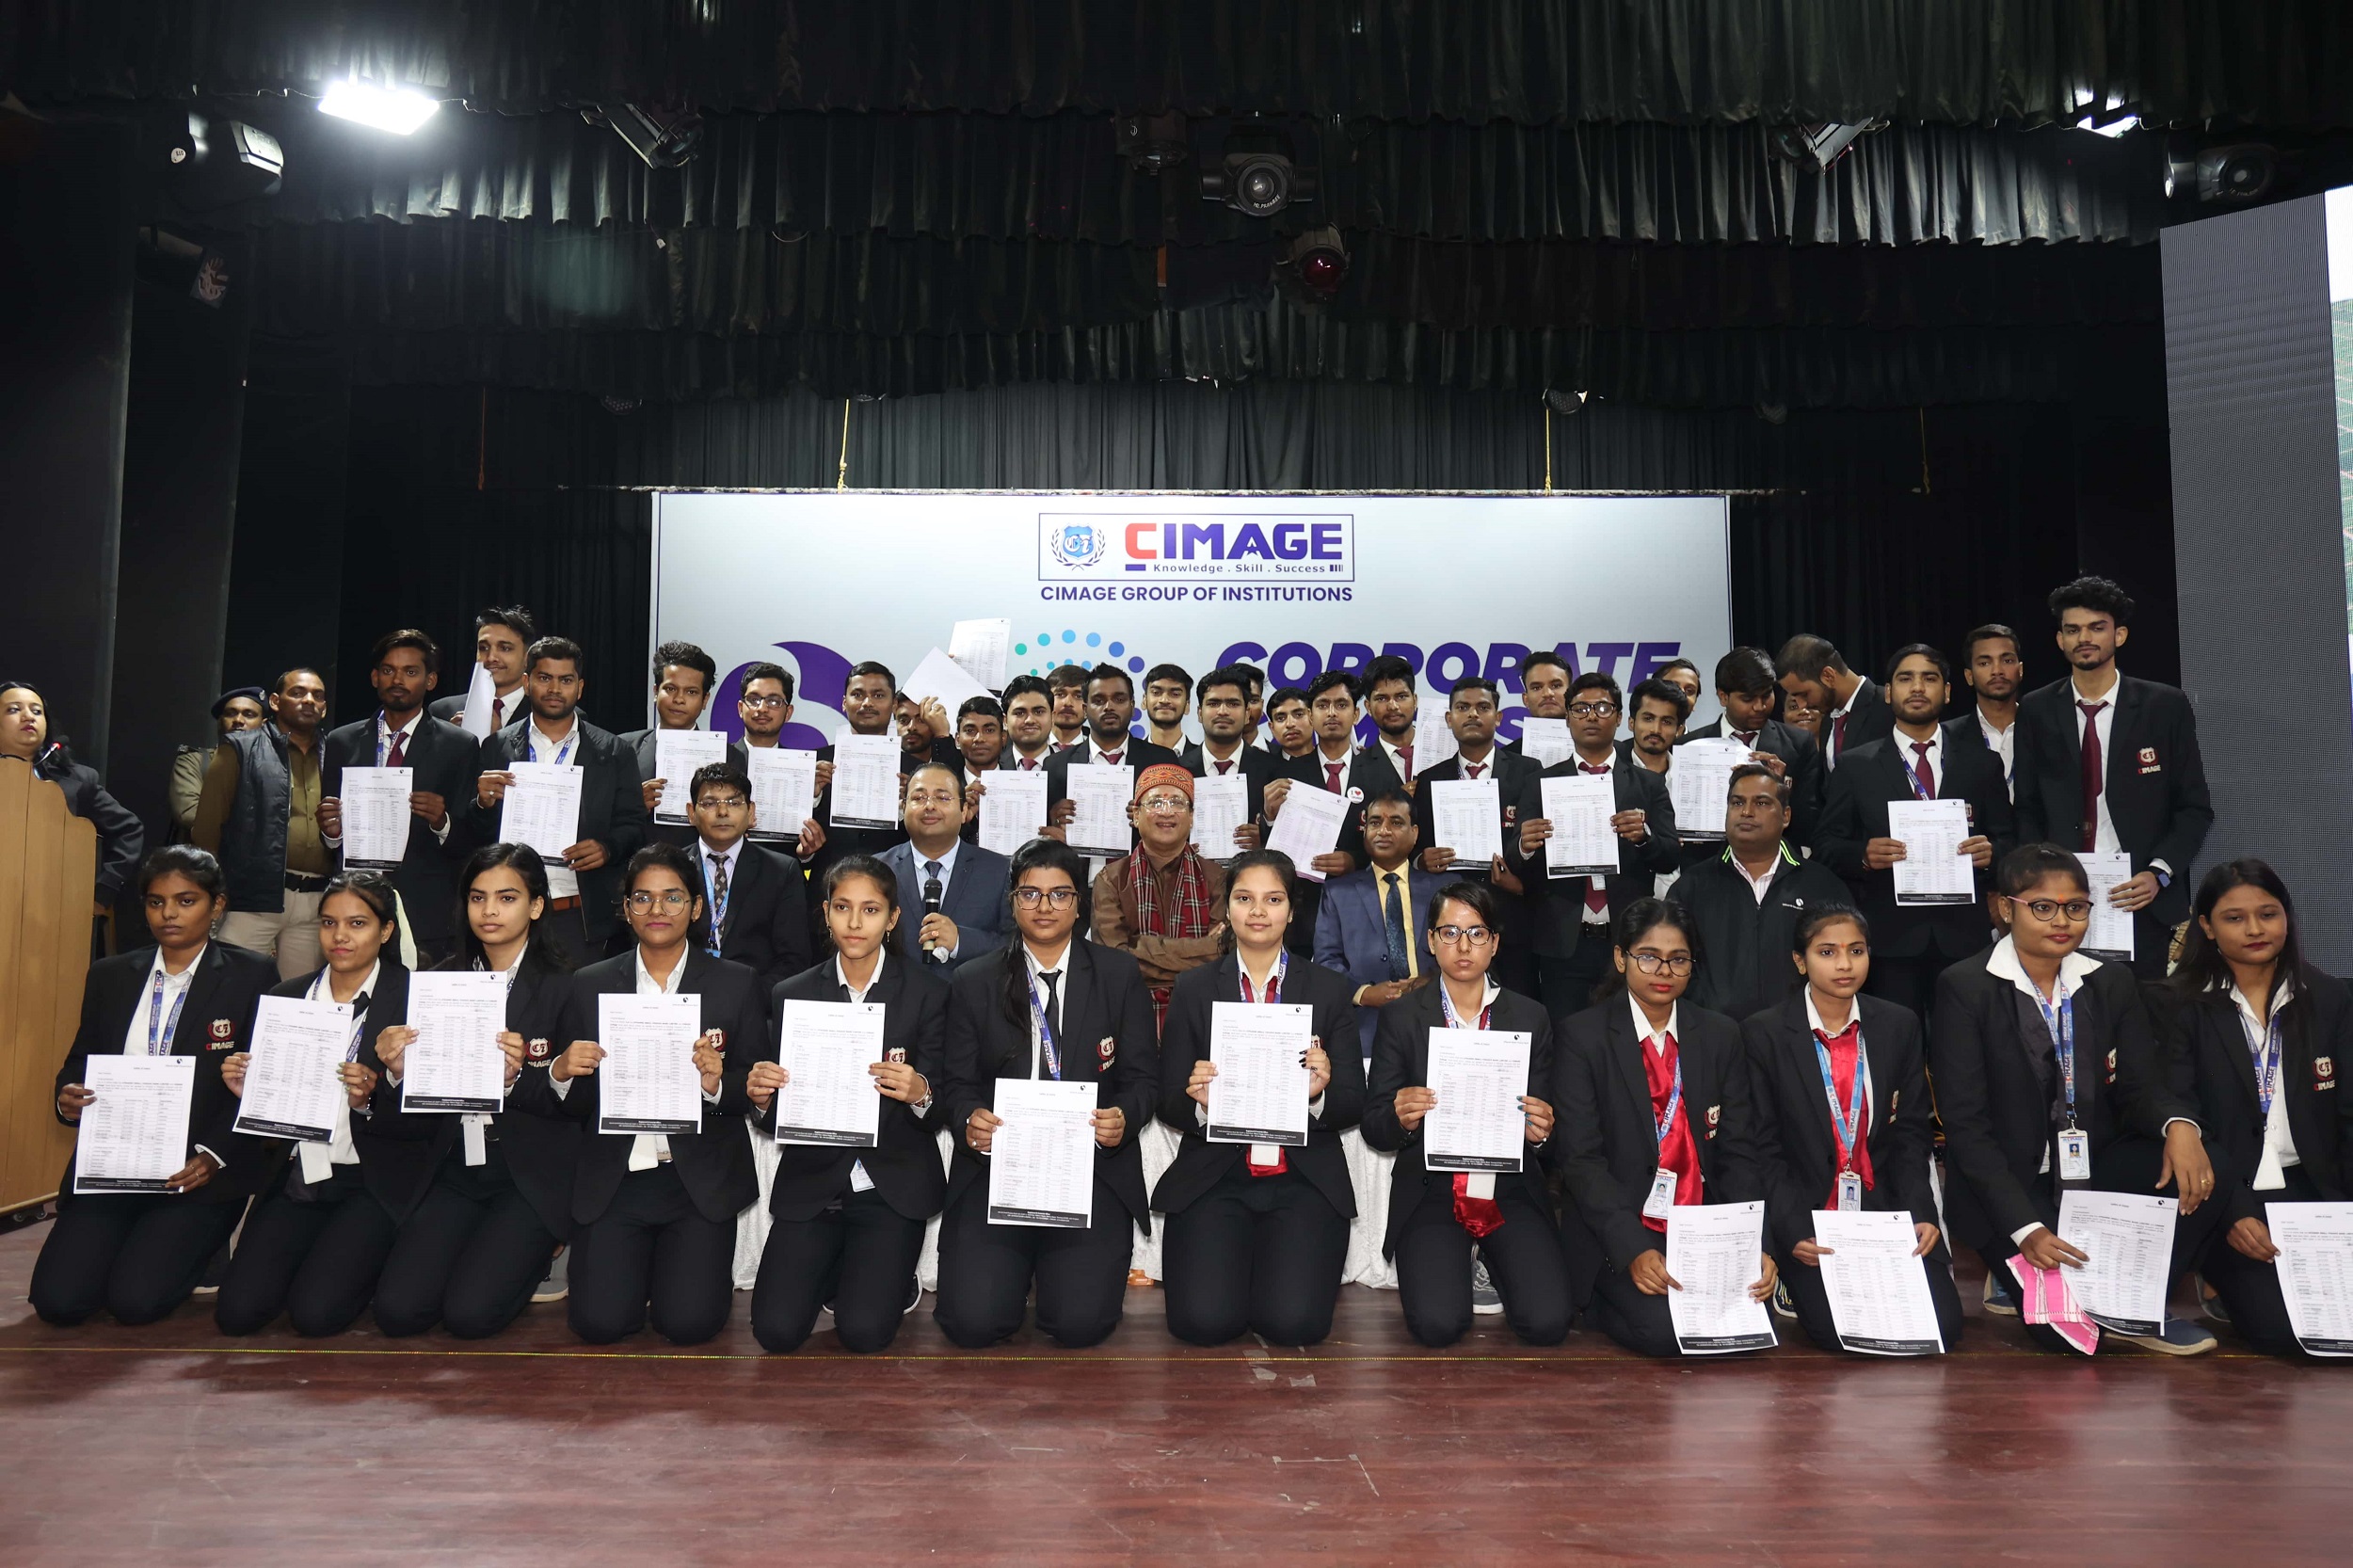 41 Students of CIMAGE were placed in Utkarsh Small Finance Bank | CIMAGE College Organizes Corporate Campus Connect